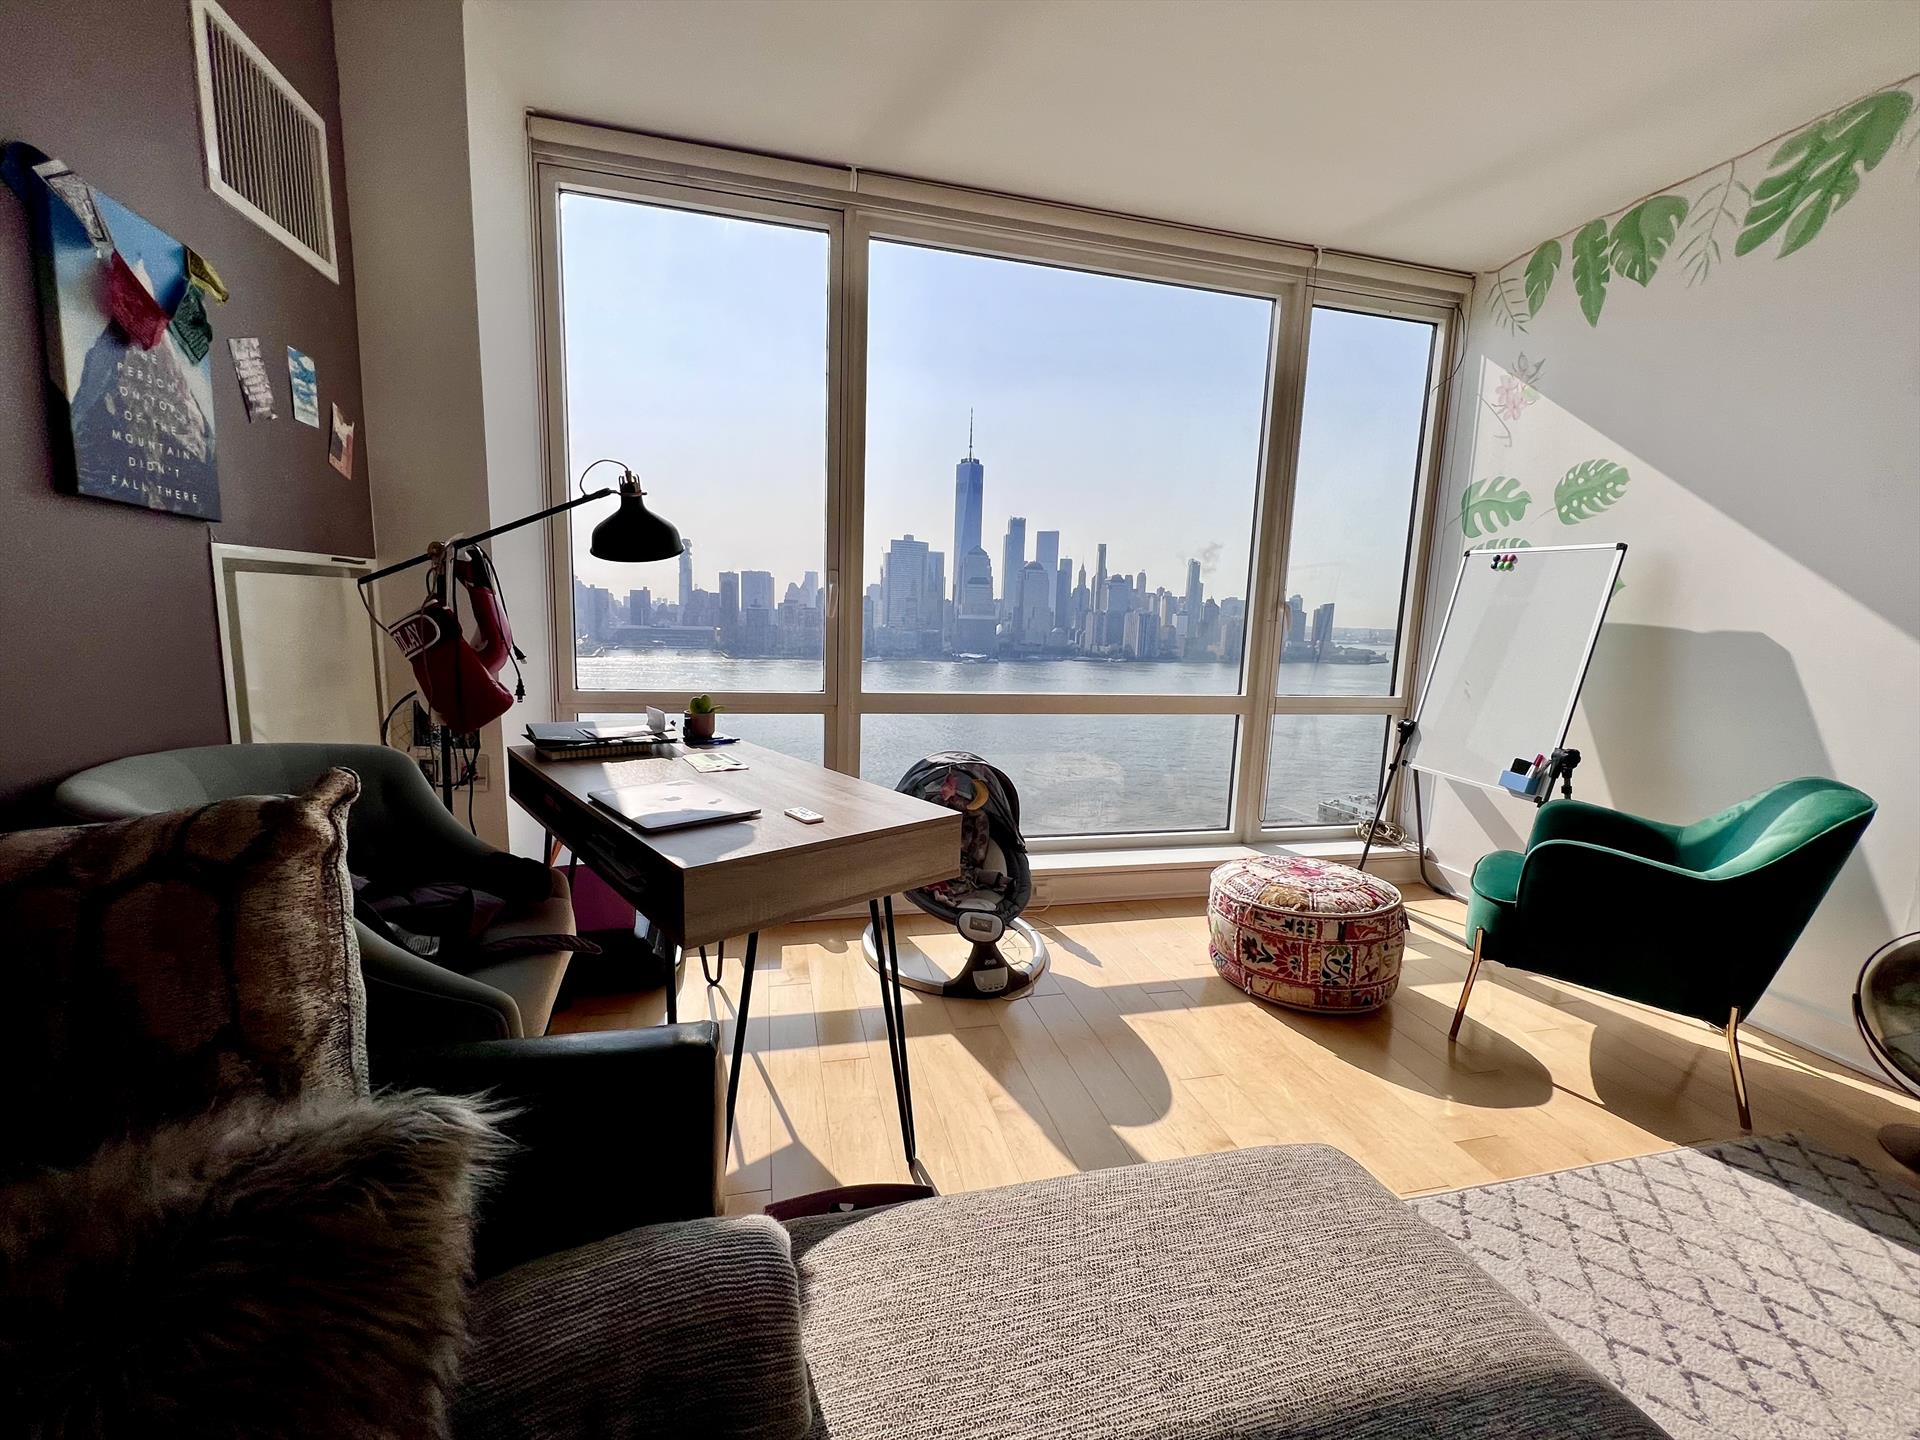 Don't miss this gorgeous 1 bedroom 1.5 bath located at Crystal Point in Downtown Jersey City. Long spacious entry hallway with chef's kitchen with gas stove, dishwasher, washer dryer in unit, and valet parking included. Sweeping views of Manhattan and great natural lighting. Walk in closet and built in closet dresser in bedroom. Lots of storage and space in this highly sought after unit. Community amenities include a brand new pool, grills, gym, community room, and more! Accent walls can be painted or kept as is (wall mural was professionally added by an artist). Call for tour or video today.